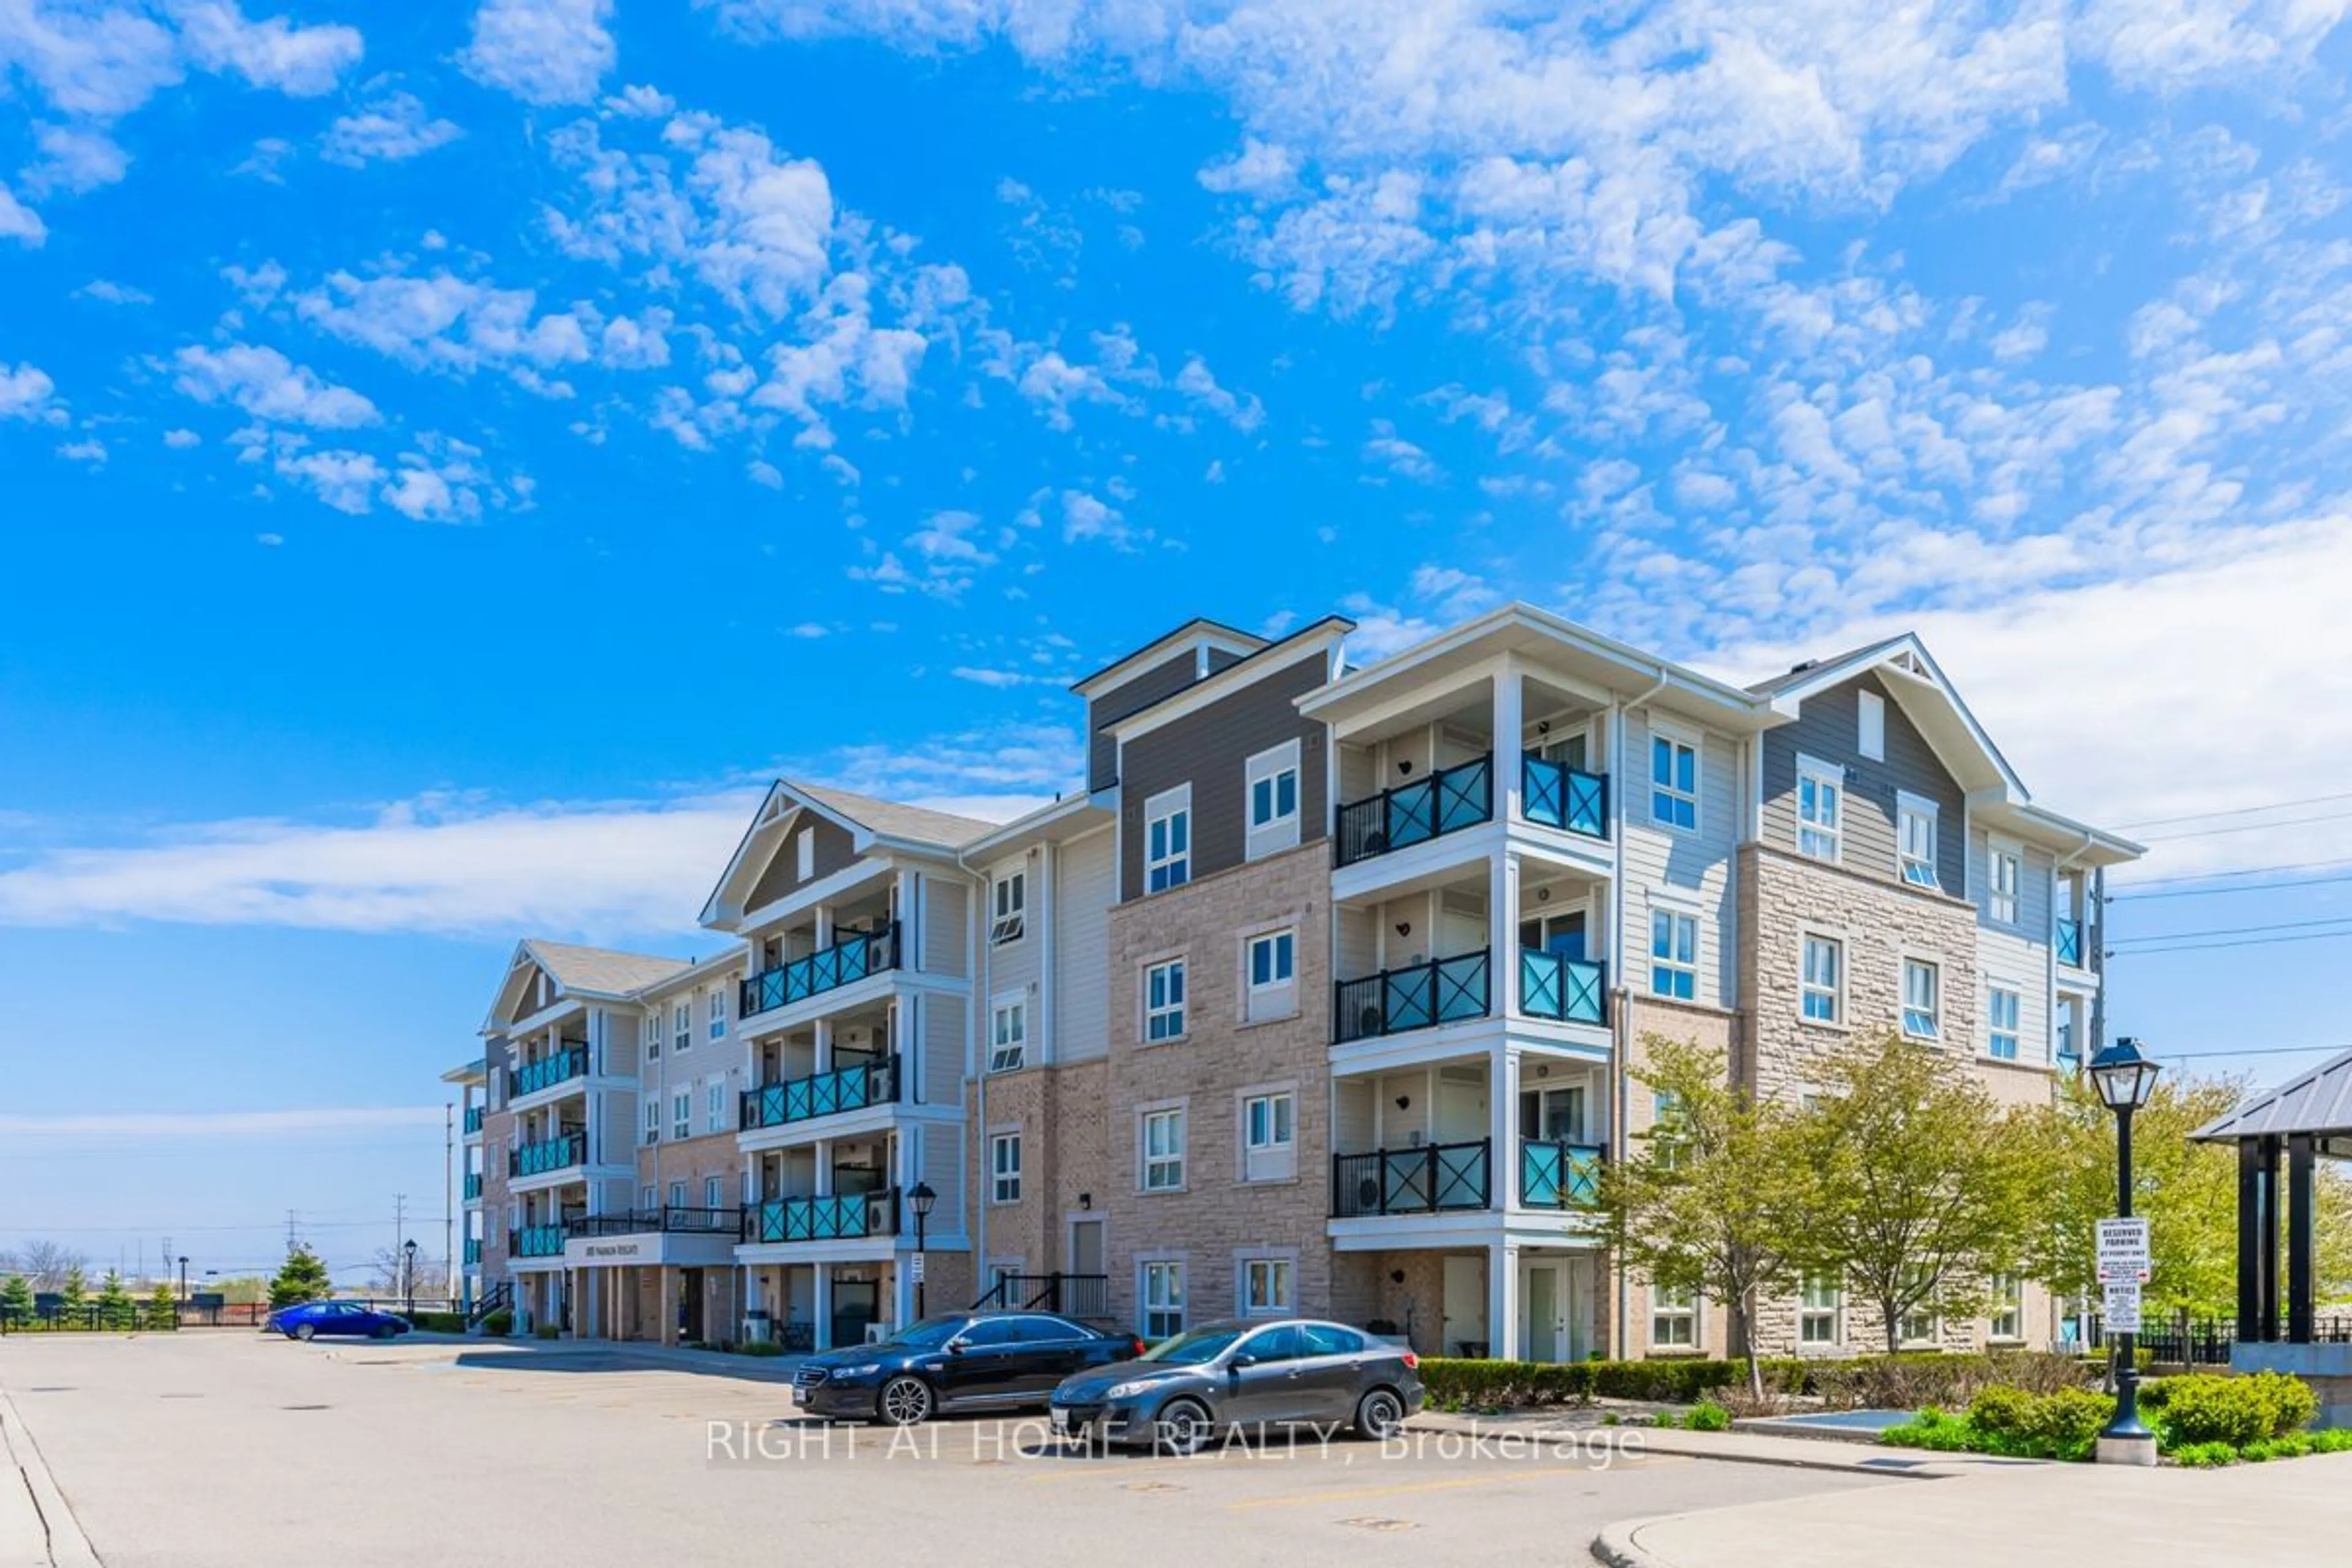 A pic from exterior of the house or condo for 1005 Nadalin Hts #212, Milton Ontario L9T 8R4